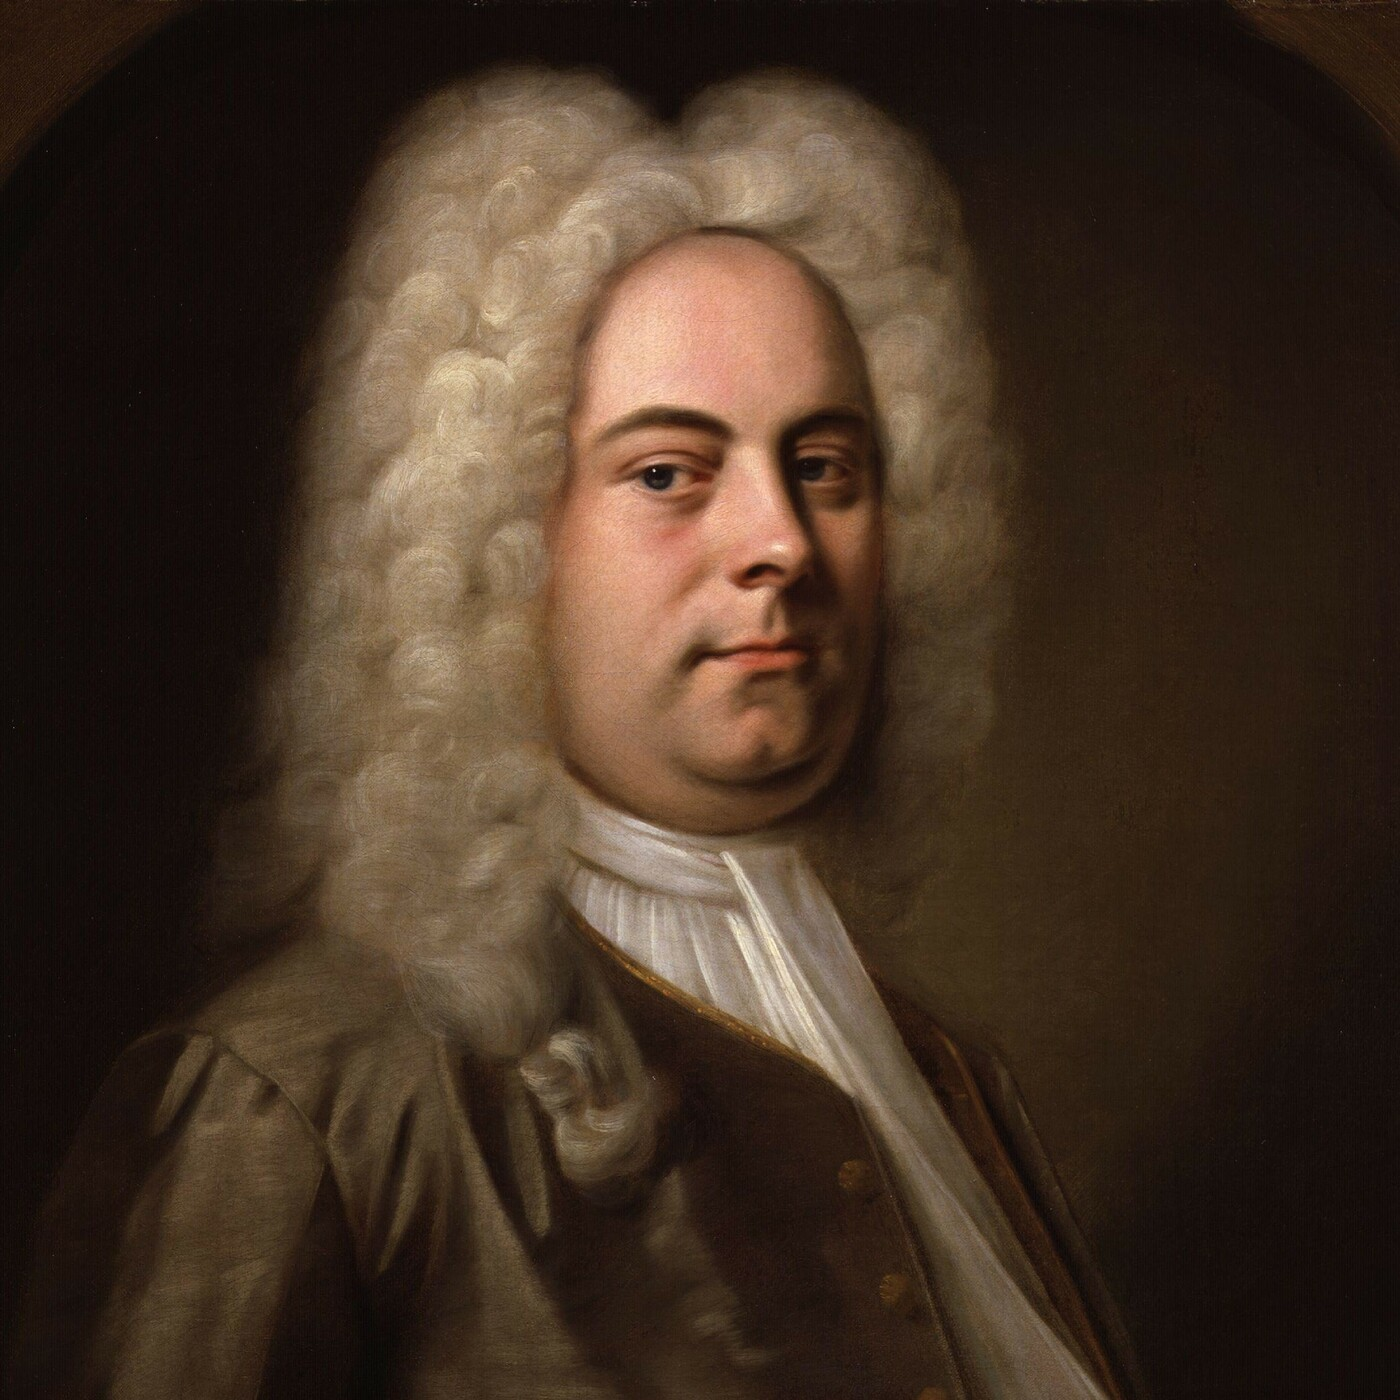 George Frideric Handel: life of fame, musical style, and 3 things you didn't know before!